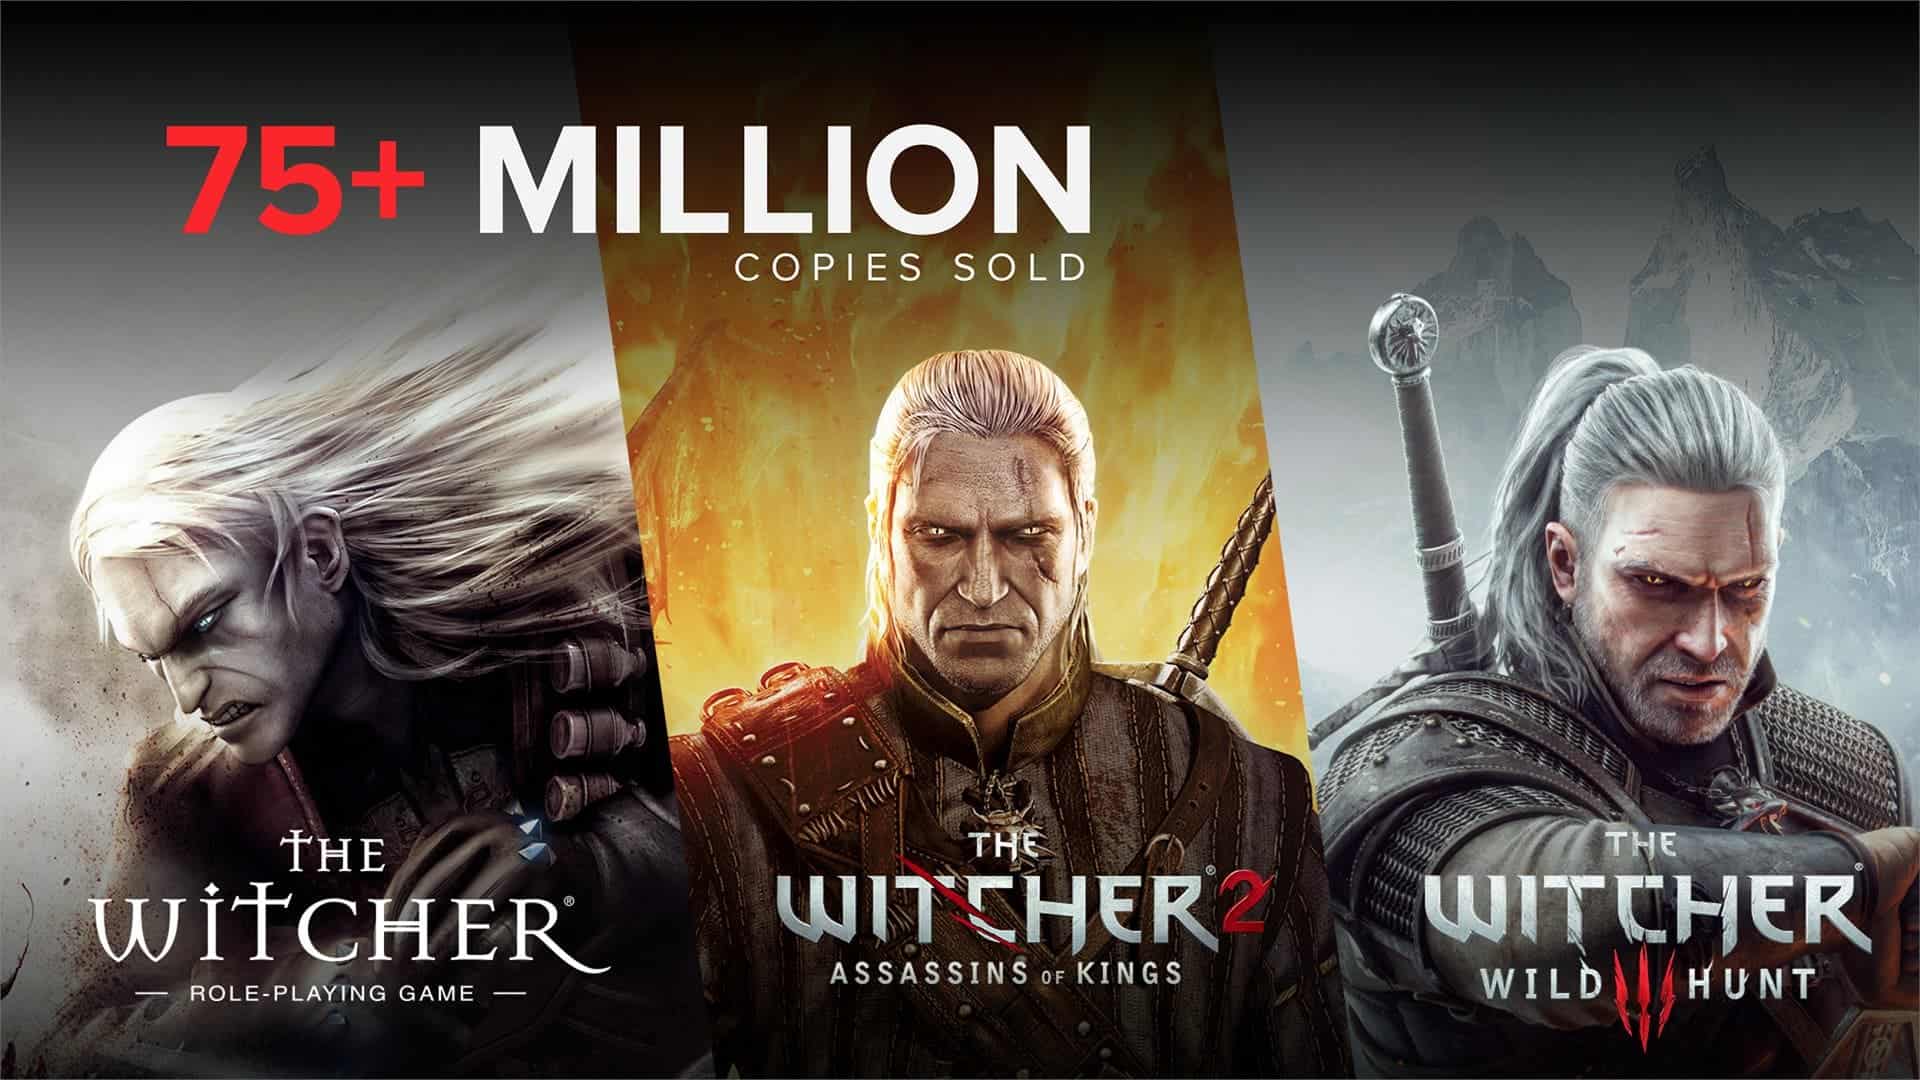 The Witcher Game Series Timeline